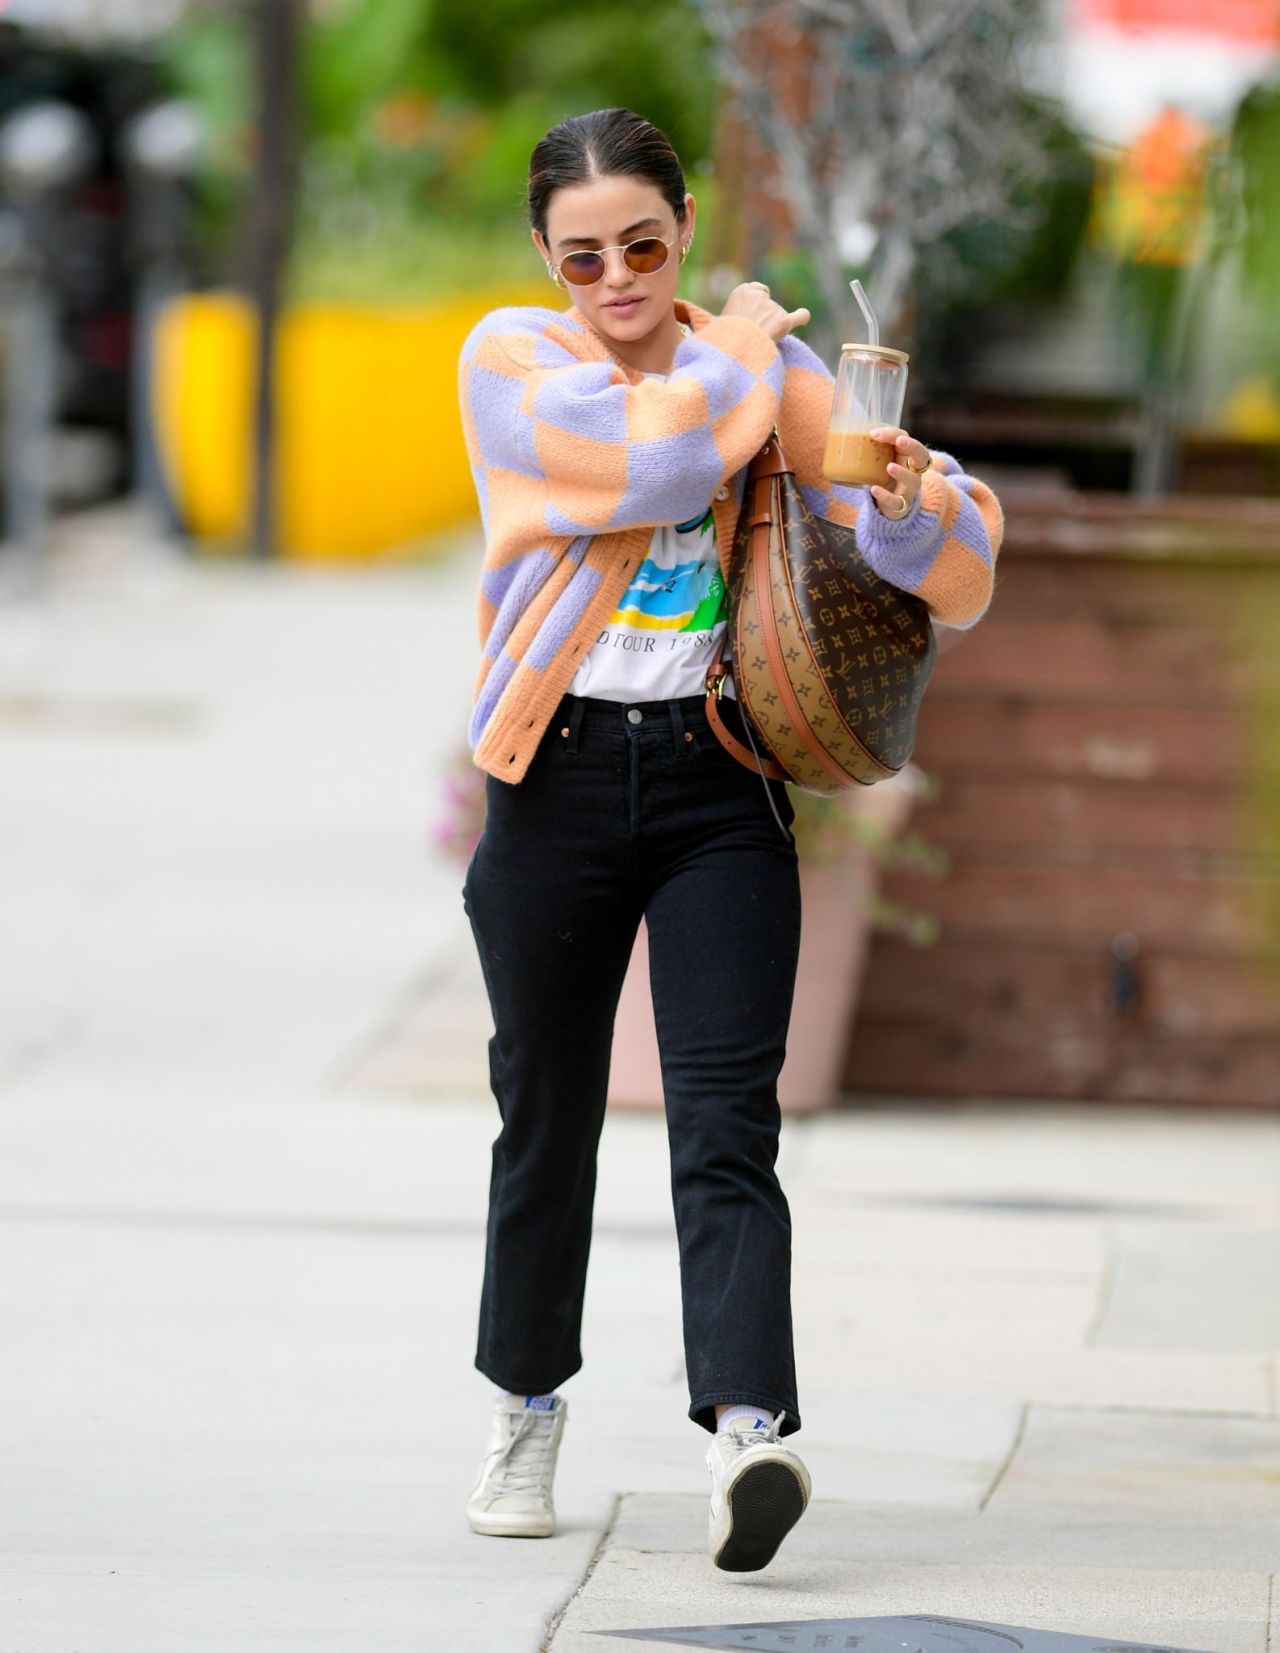 Lucy Hale Los Angeles May 5, 2023 – Star Style